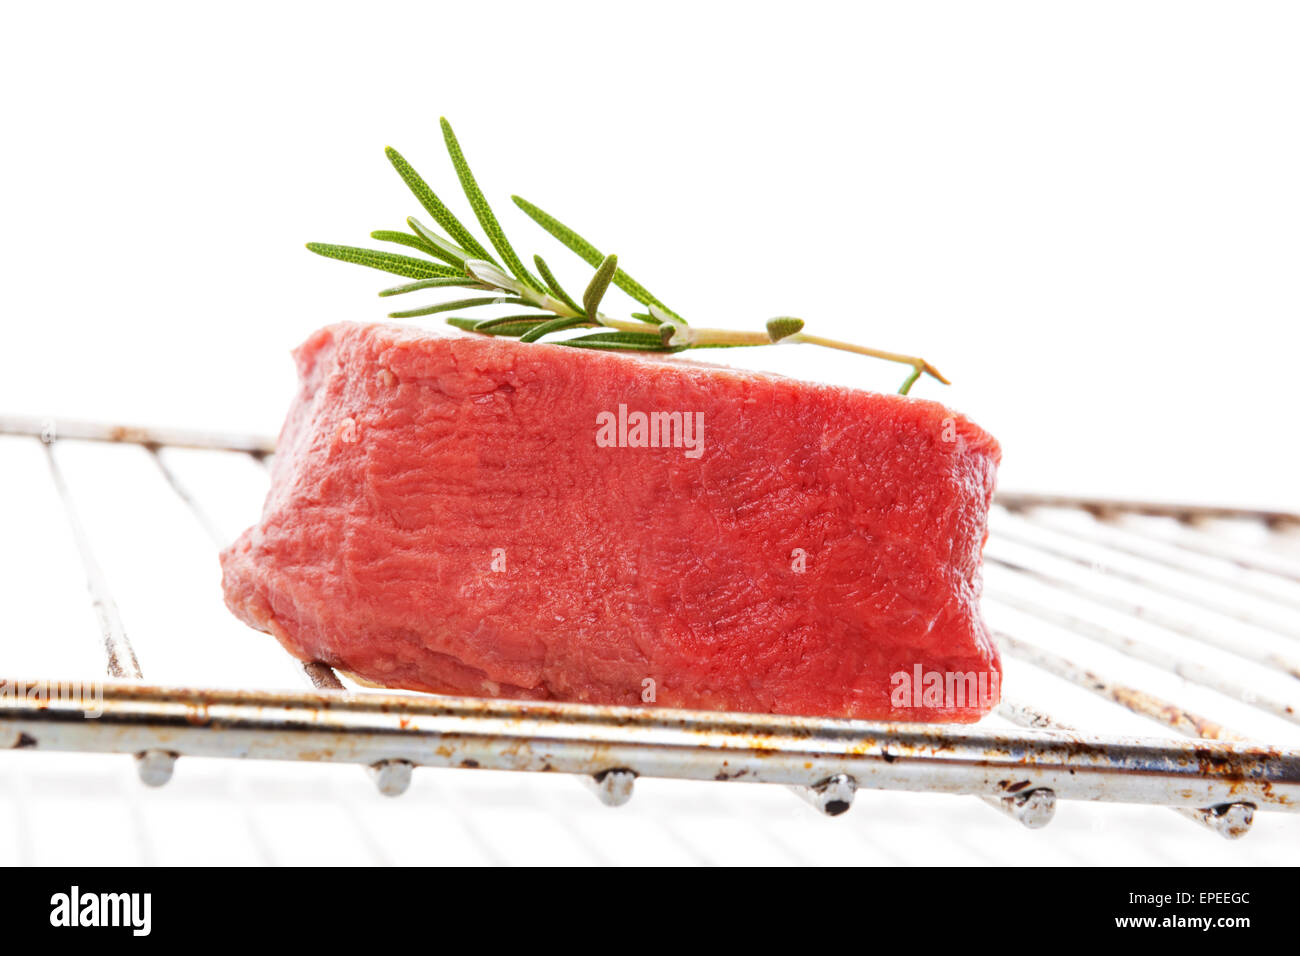 Big raw beefsteak on grill isolated on white background. Culinary delicious red meat eating. Stock Photo